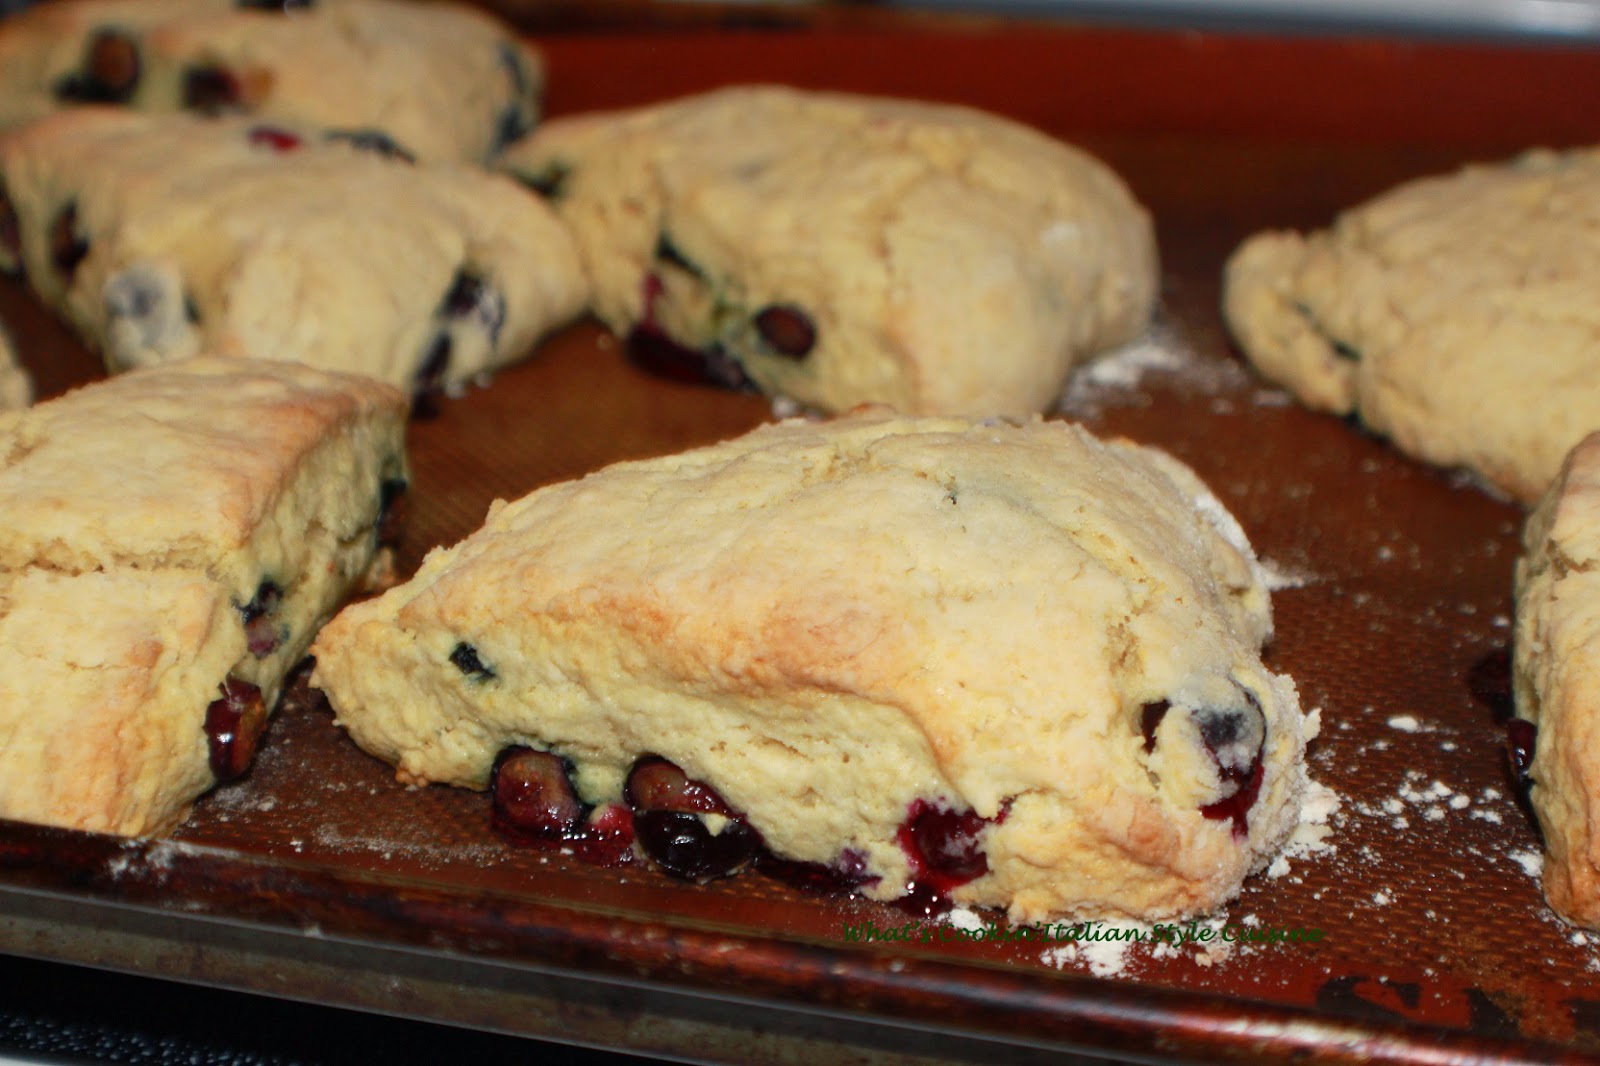 these are a delicious homemade buttery flavored baked biscuits called scones. These have blueberries in them with a drizzle of thin frosting over the top with slivered almonds. They are usually eaten at breakfast time in European pastry shops